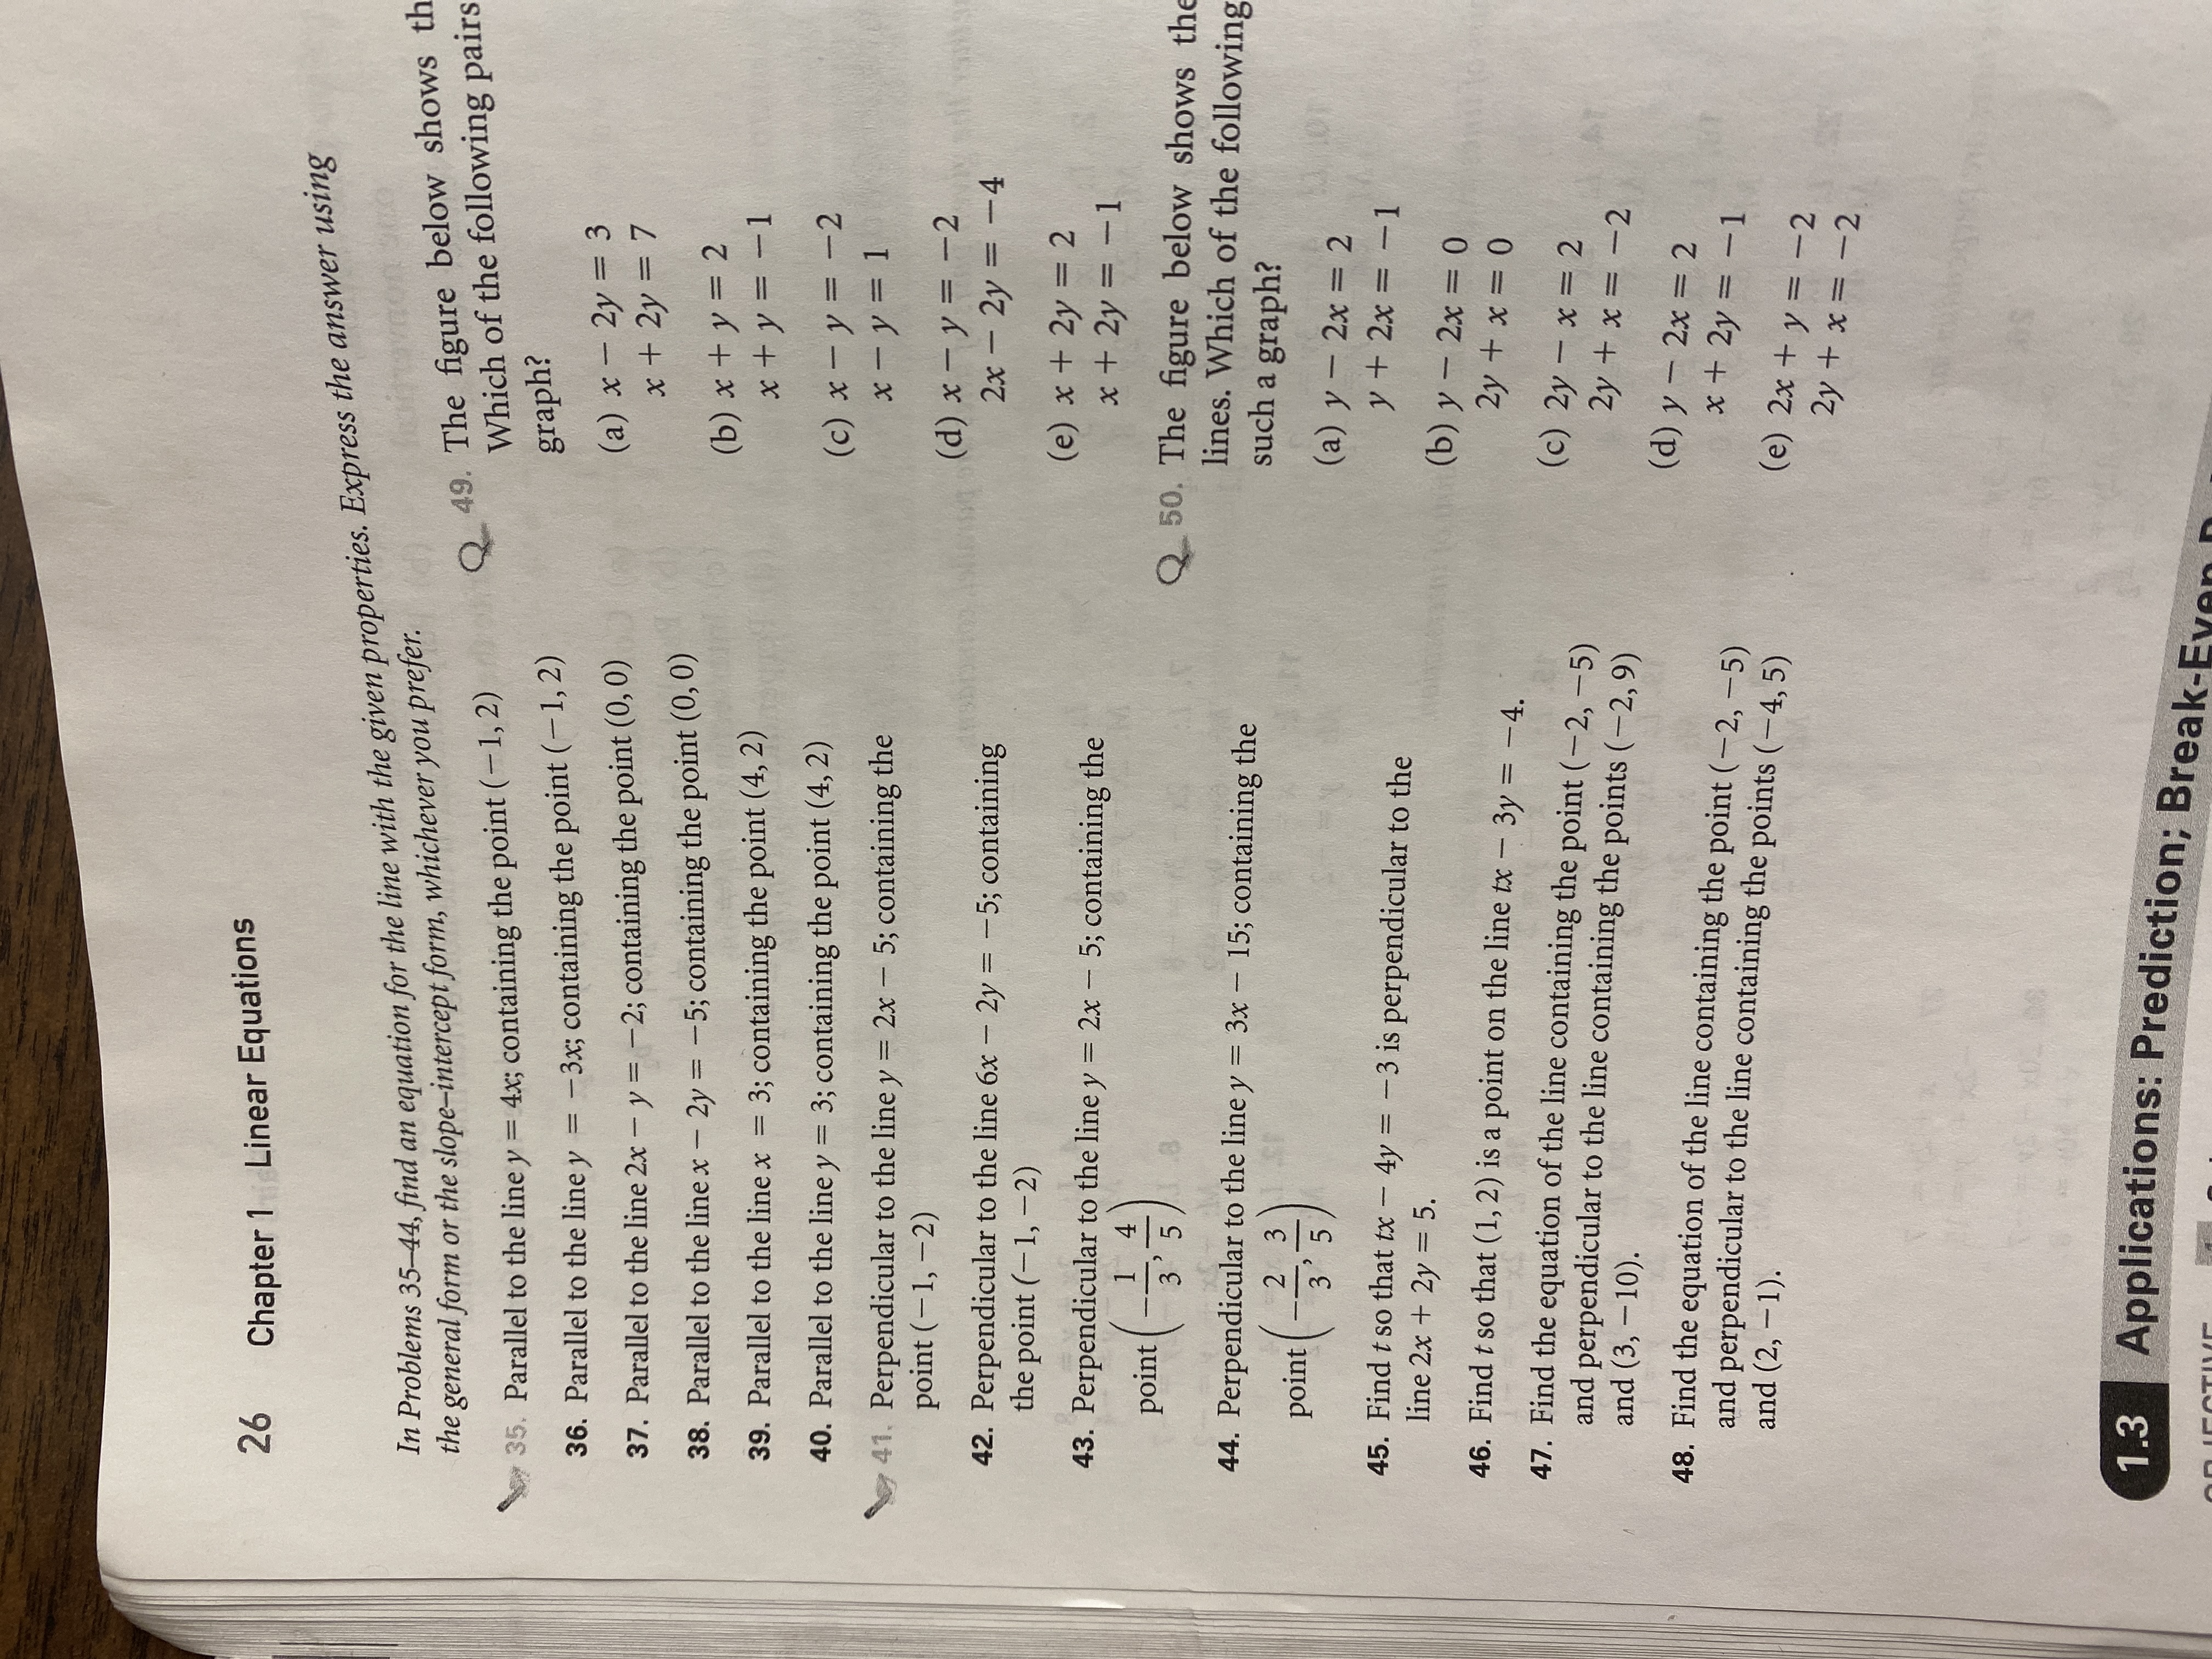 Answered 26 Linear Equations Chapter 1 M Bartleby